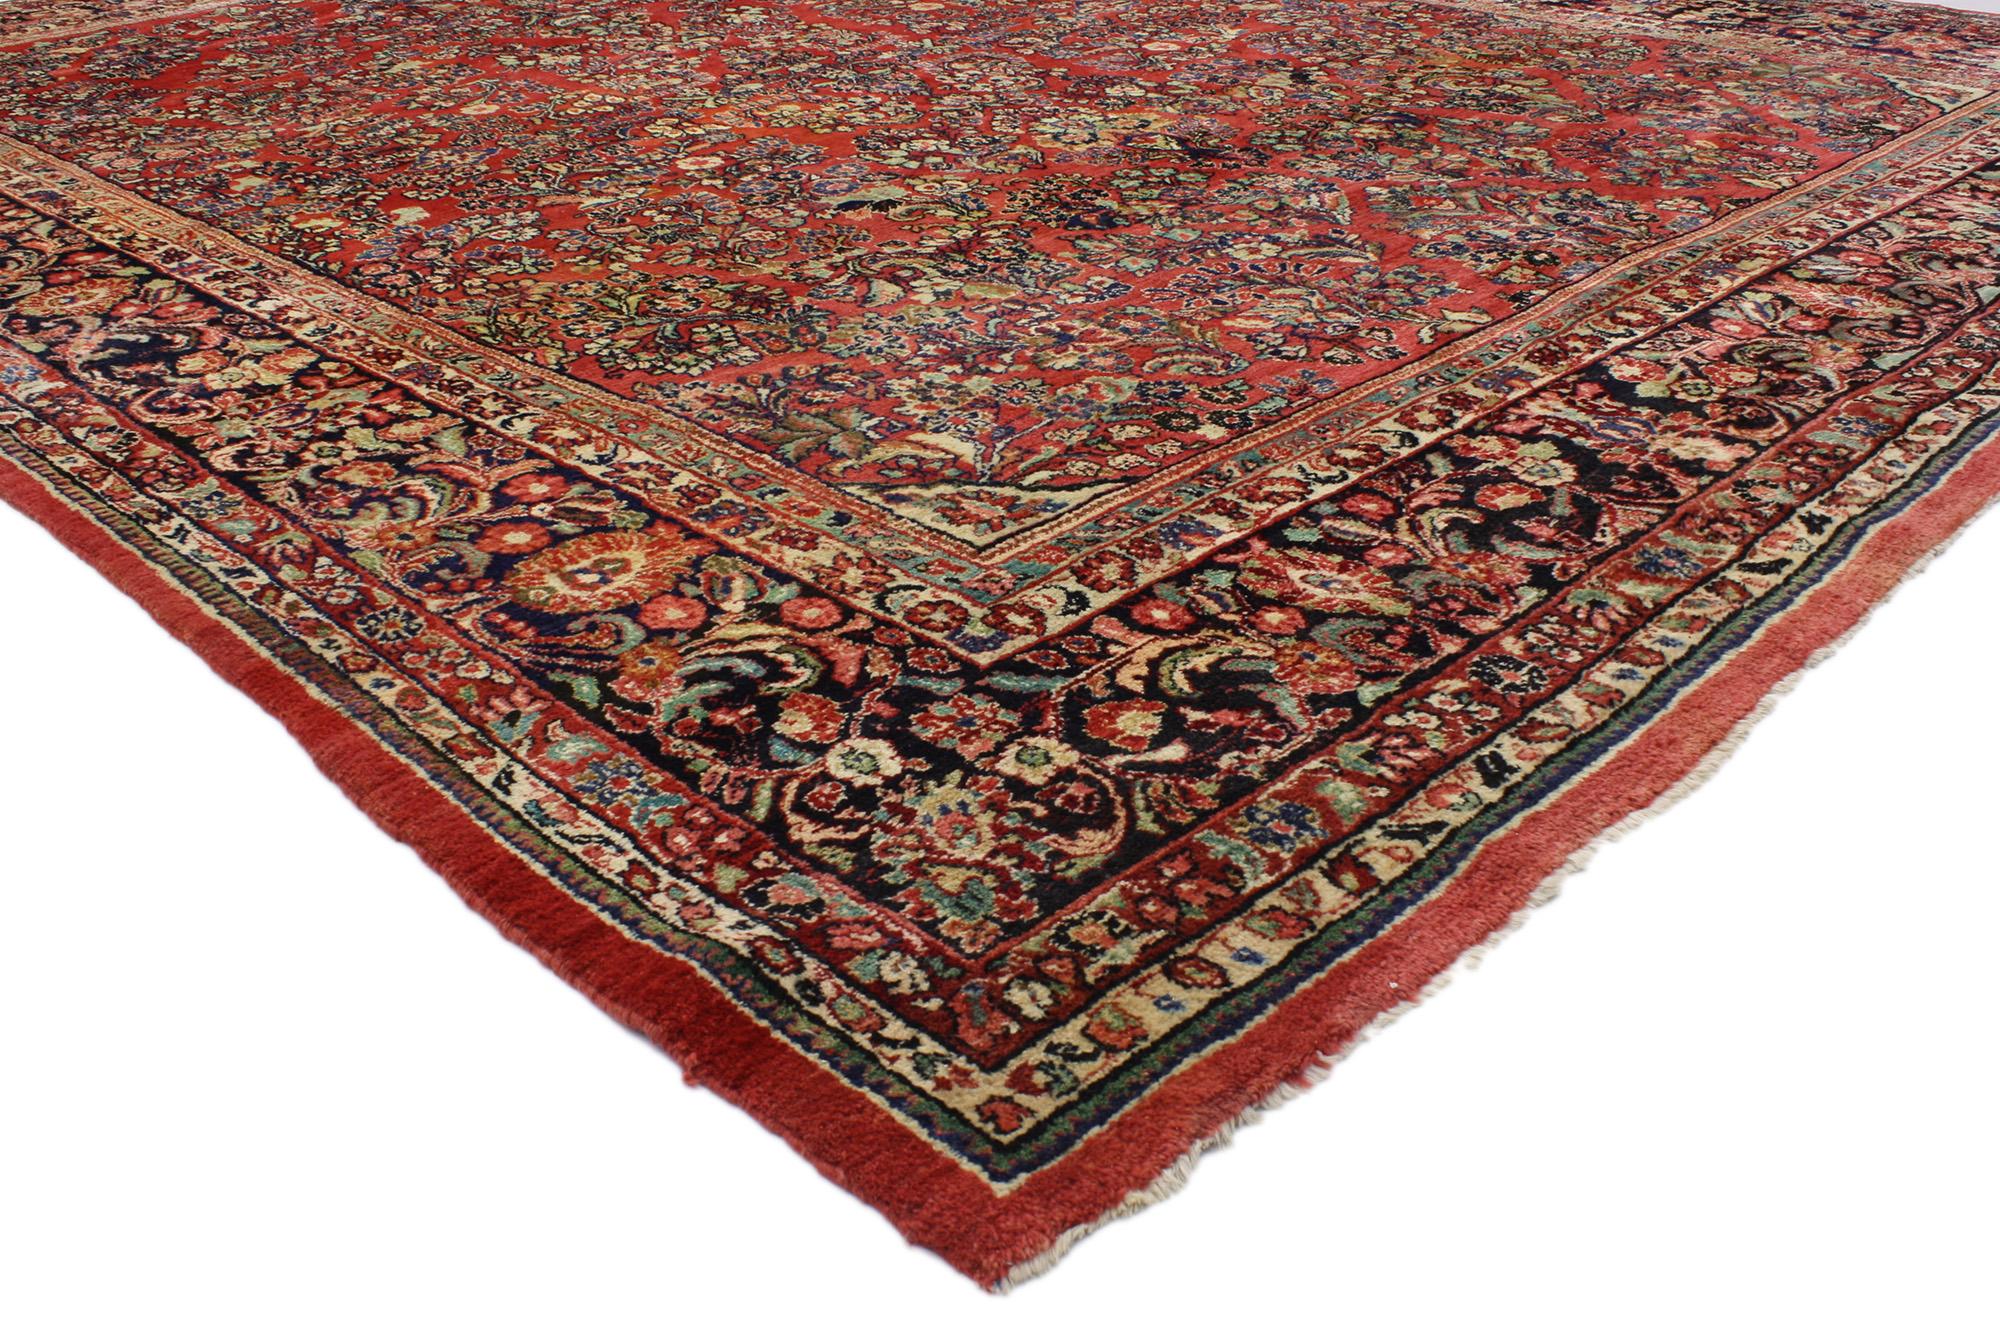 76865, antique Persian Sarouk rug with Art Nouveau style. This highly desirable antique Persian Sarouk rug with Art Nouveau style features an impressive all-over floral design rendered in a rich color palette, illuminating its lively composition.